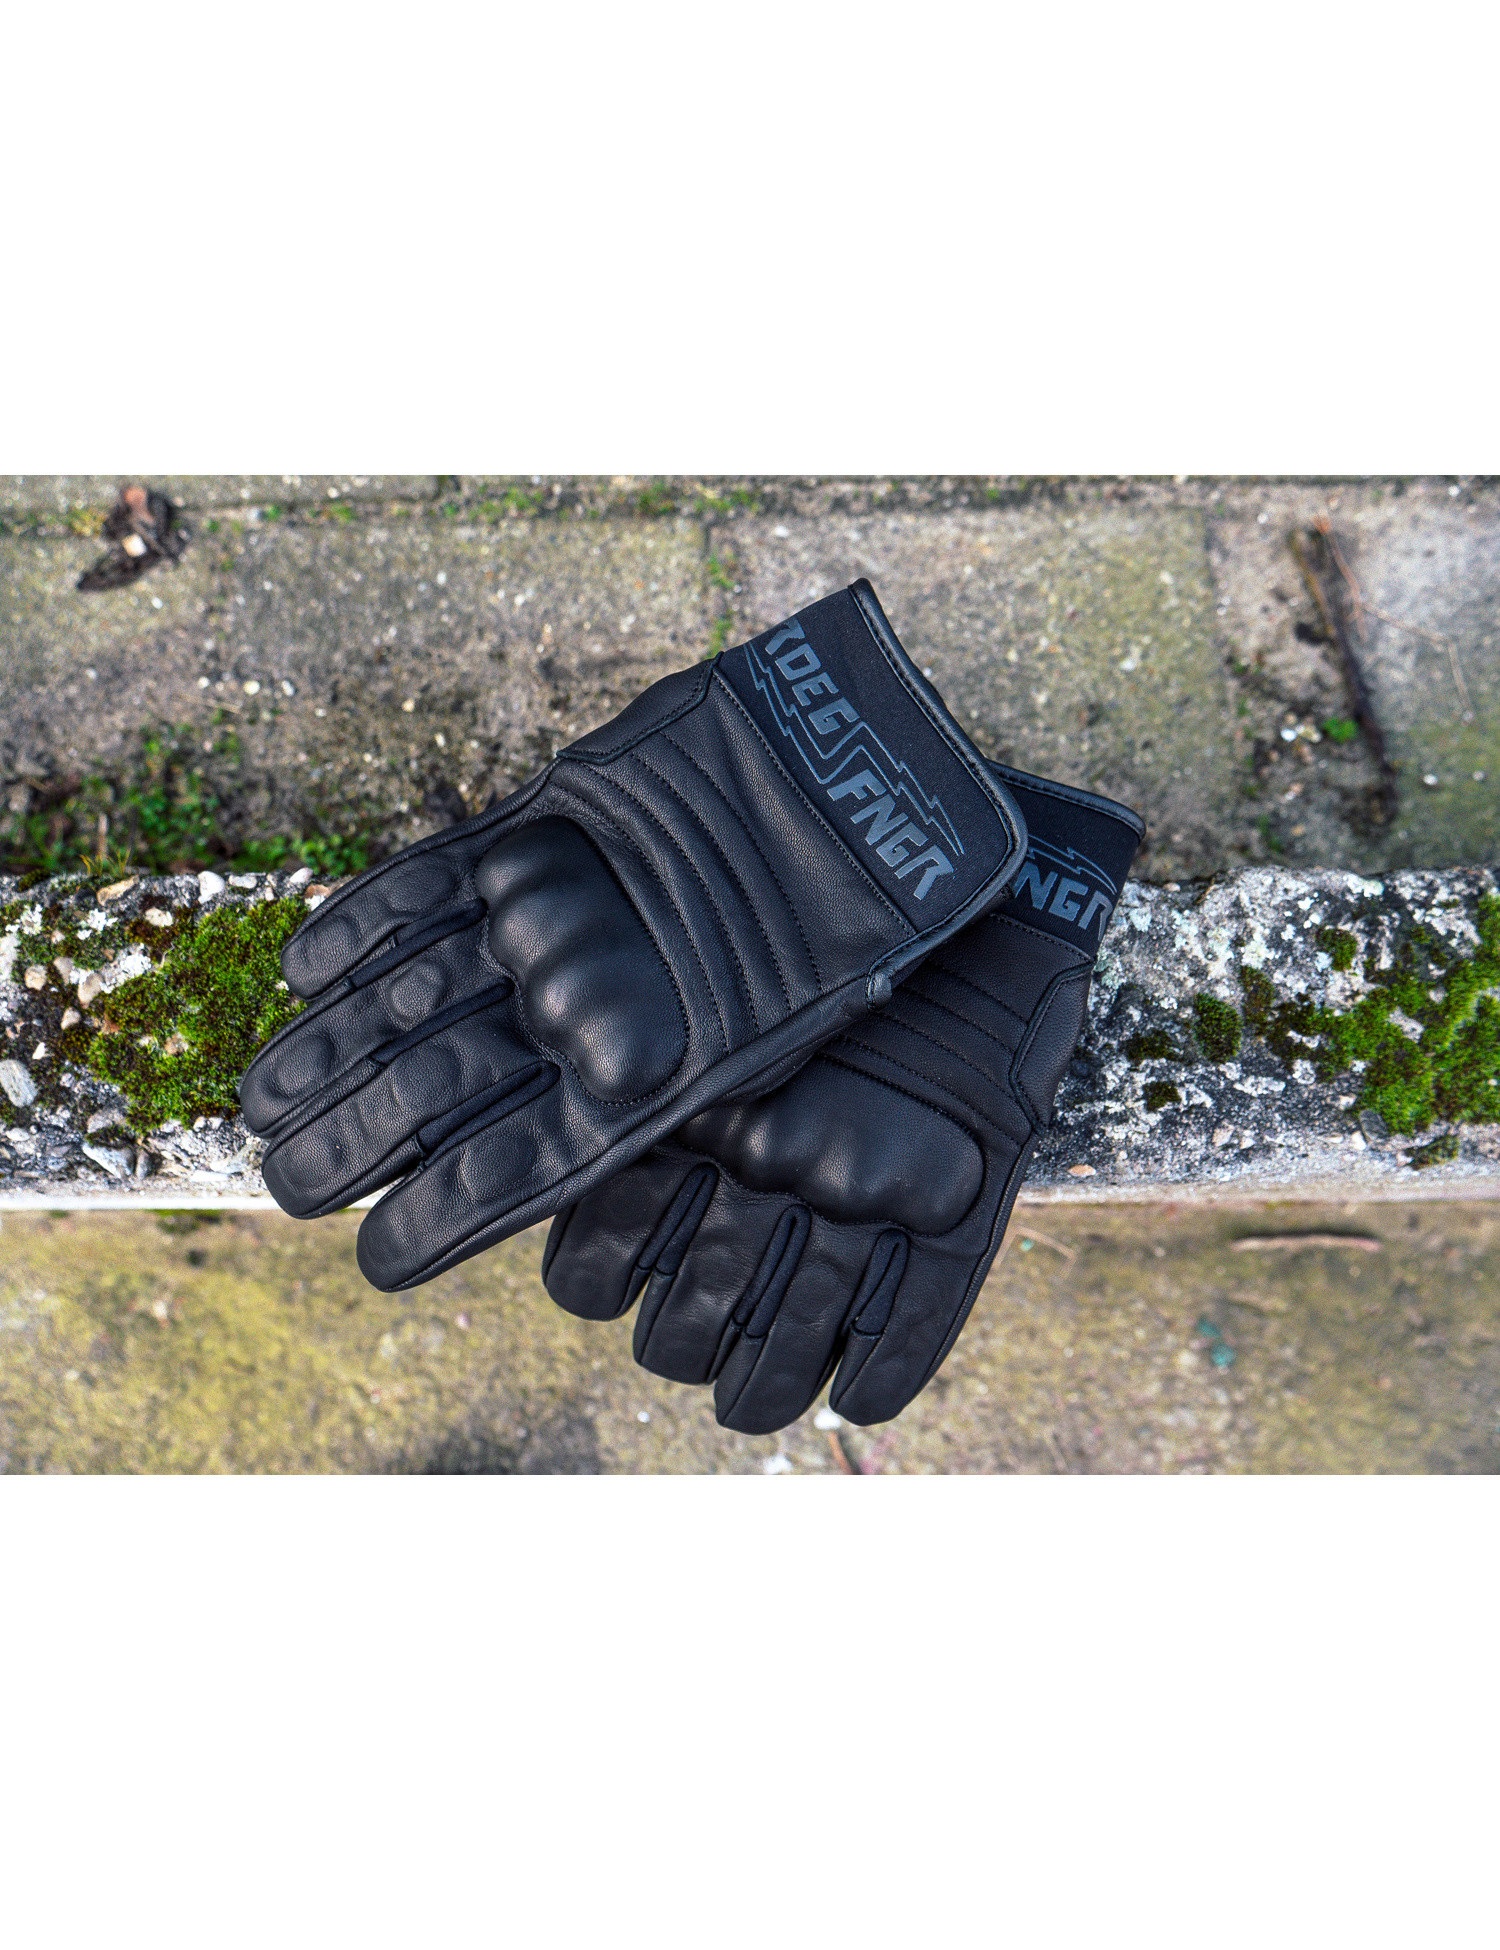 FNGR all-leather glove